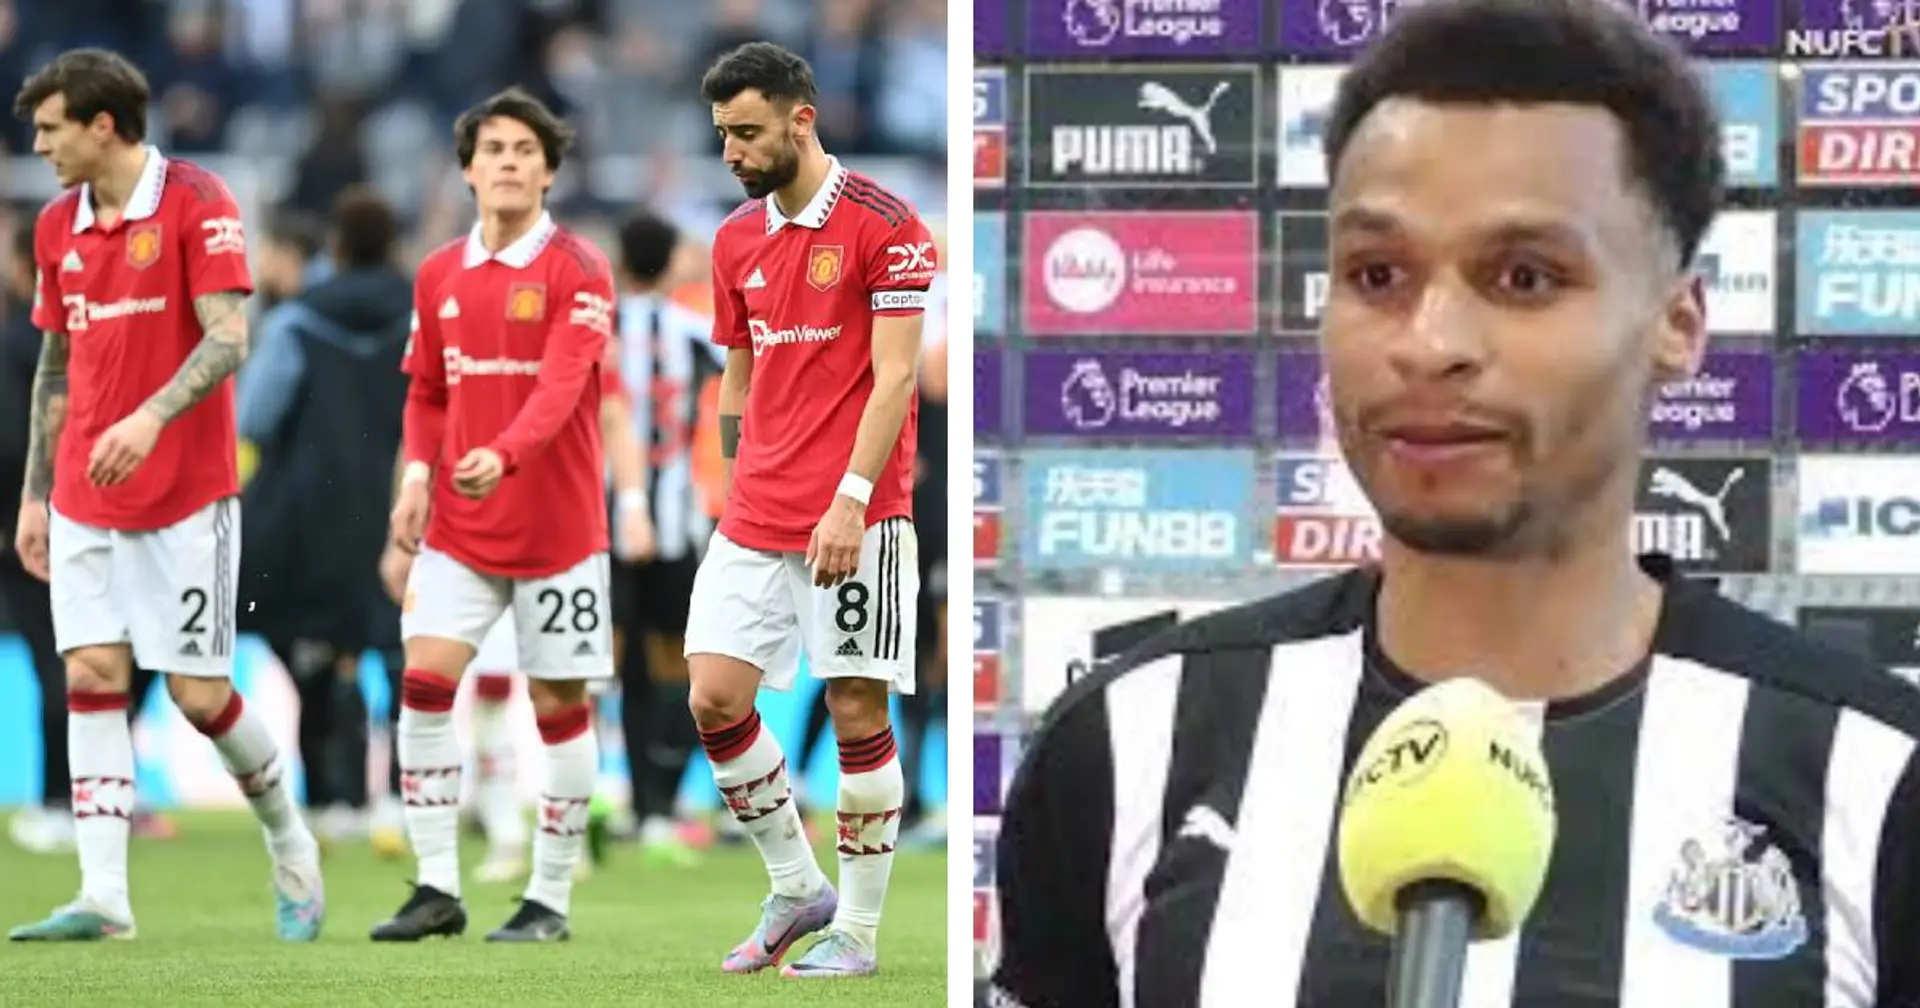 Newcastle winger names Man United's weakest player in recent loss — not who we think it is